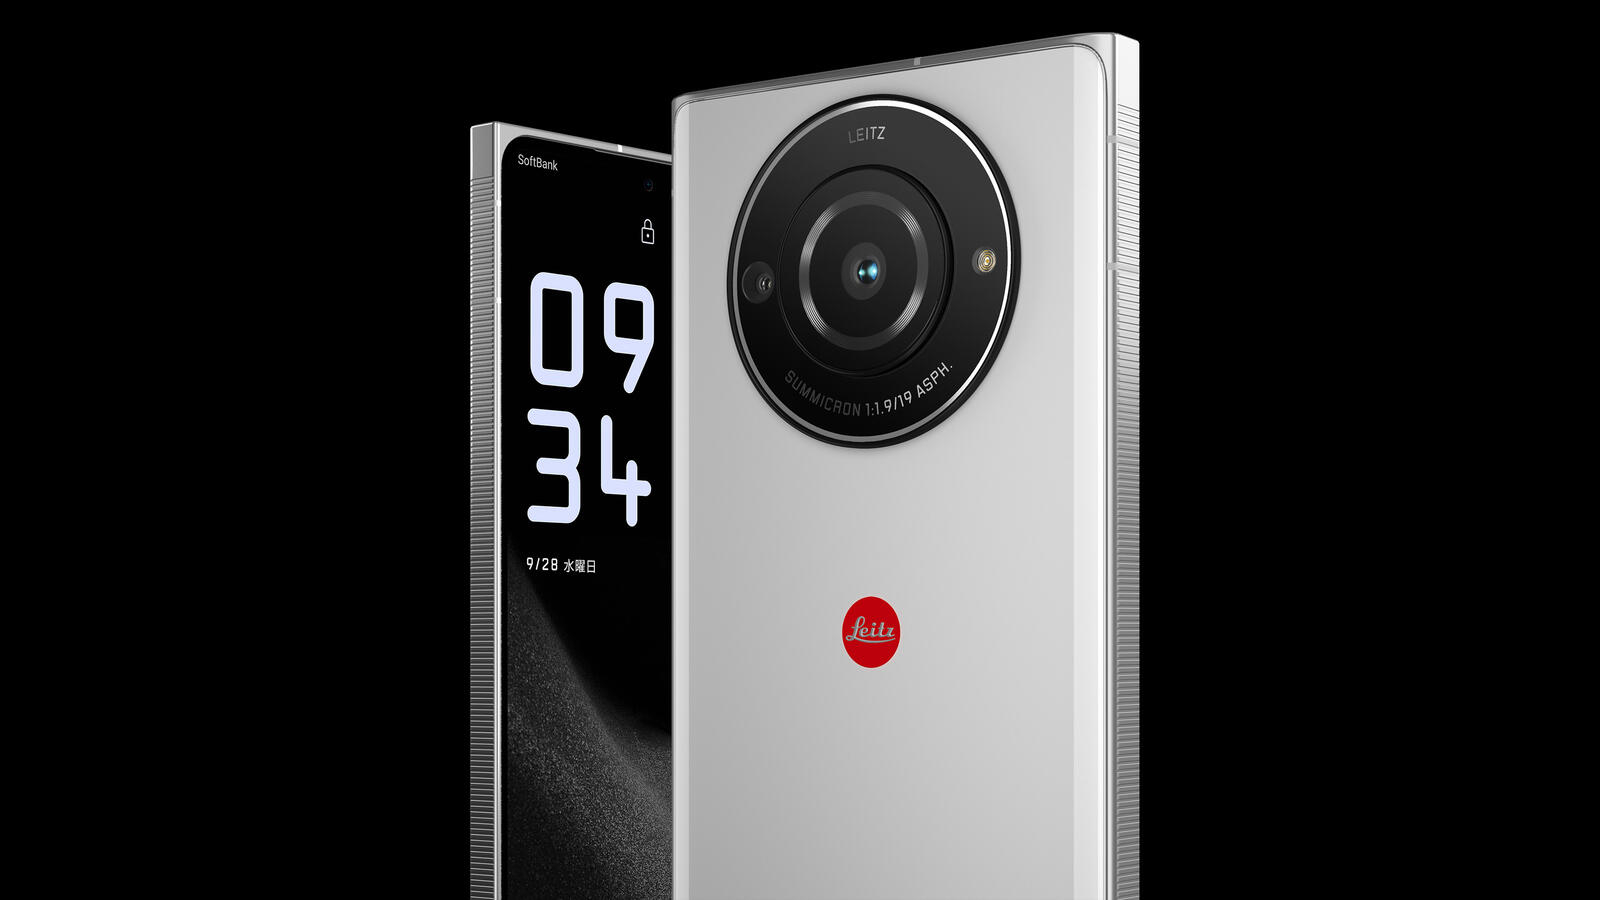 The Leica Leitz Phone 2 front and back